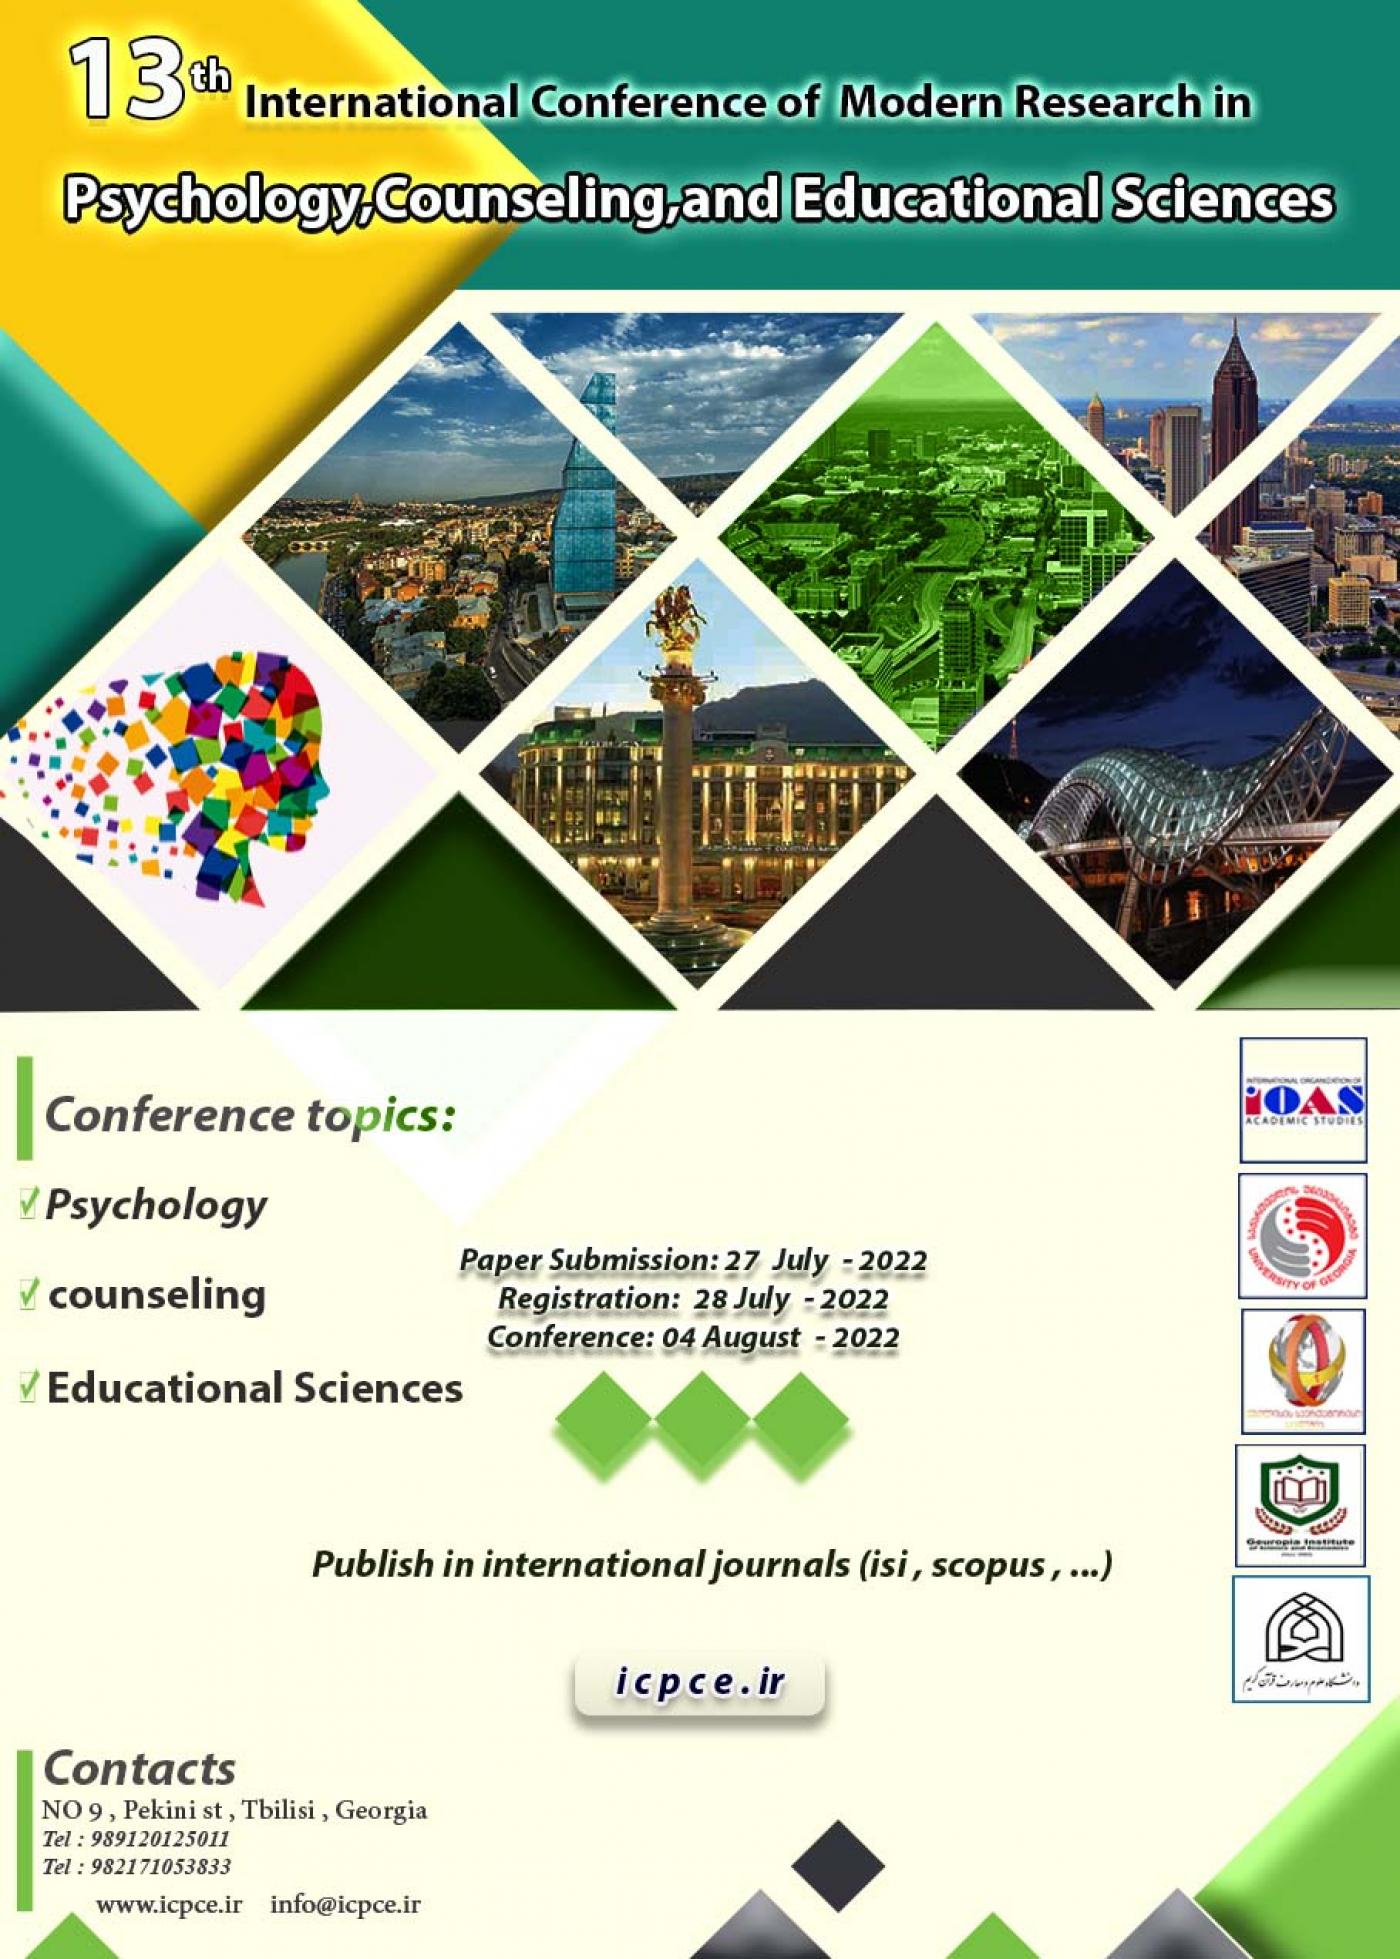 Call for Papers 13th International Conference on Psychology,Counseling,and Educational Sciences